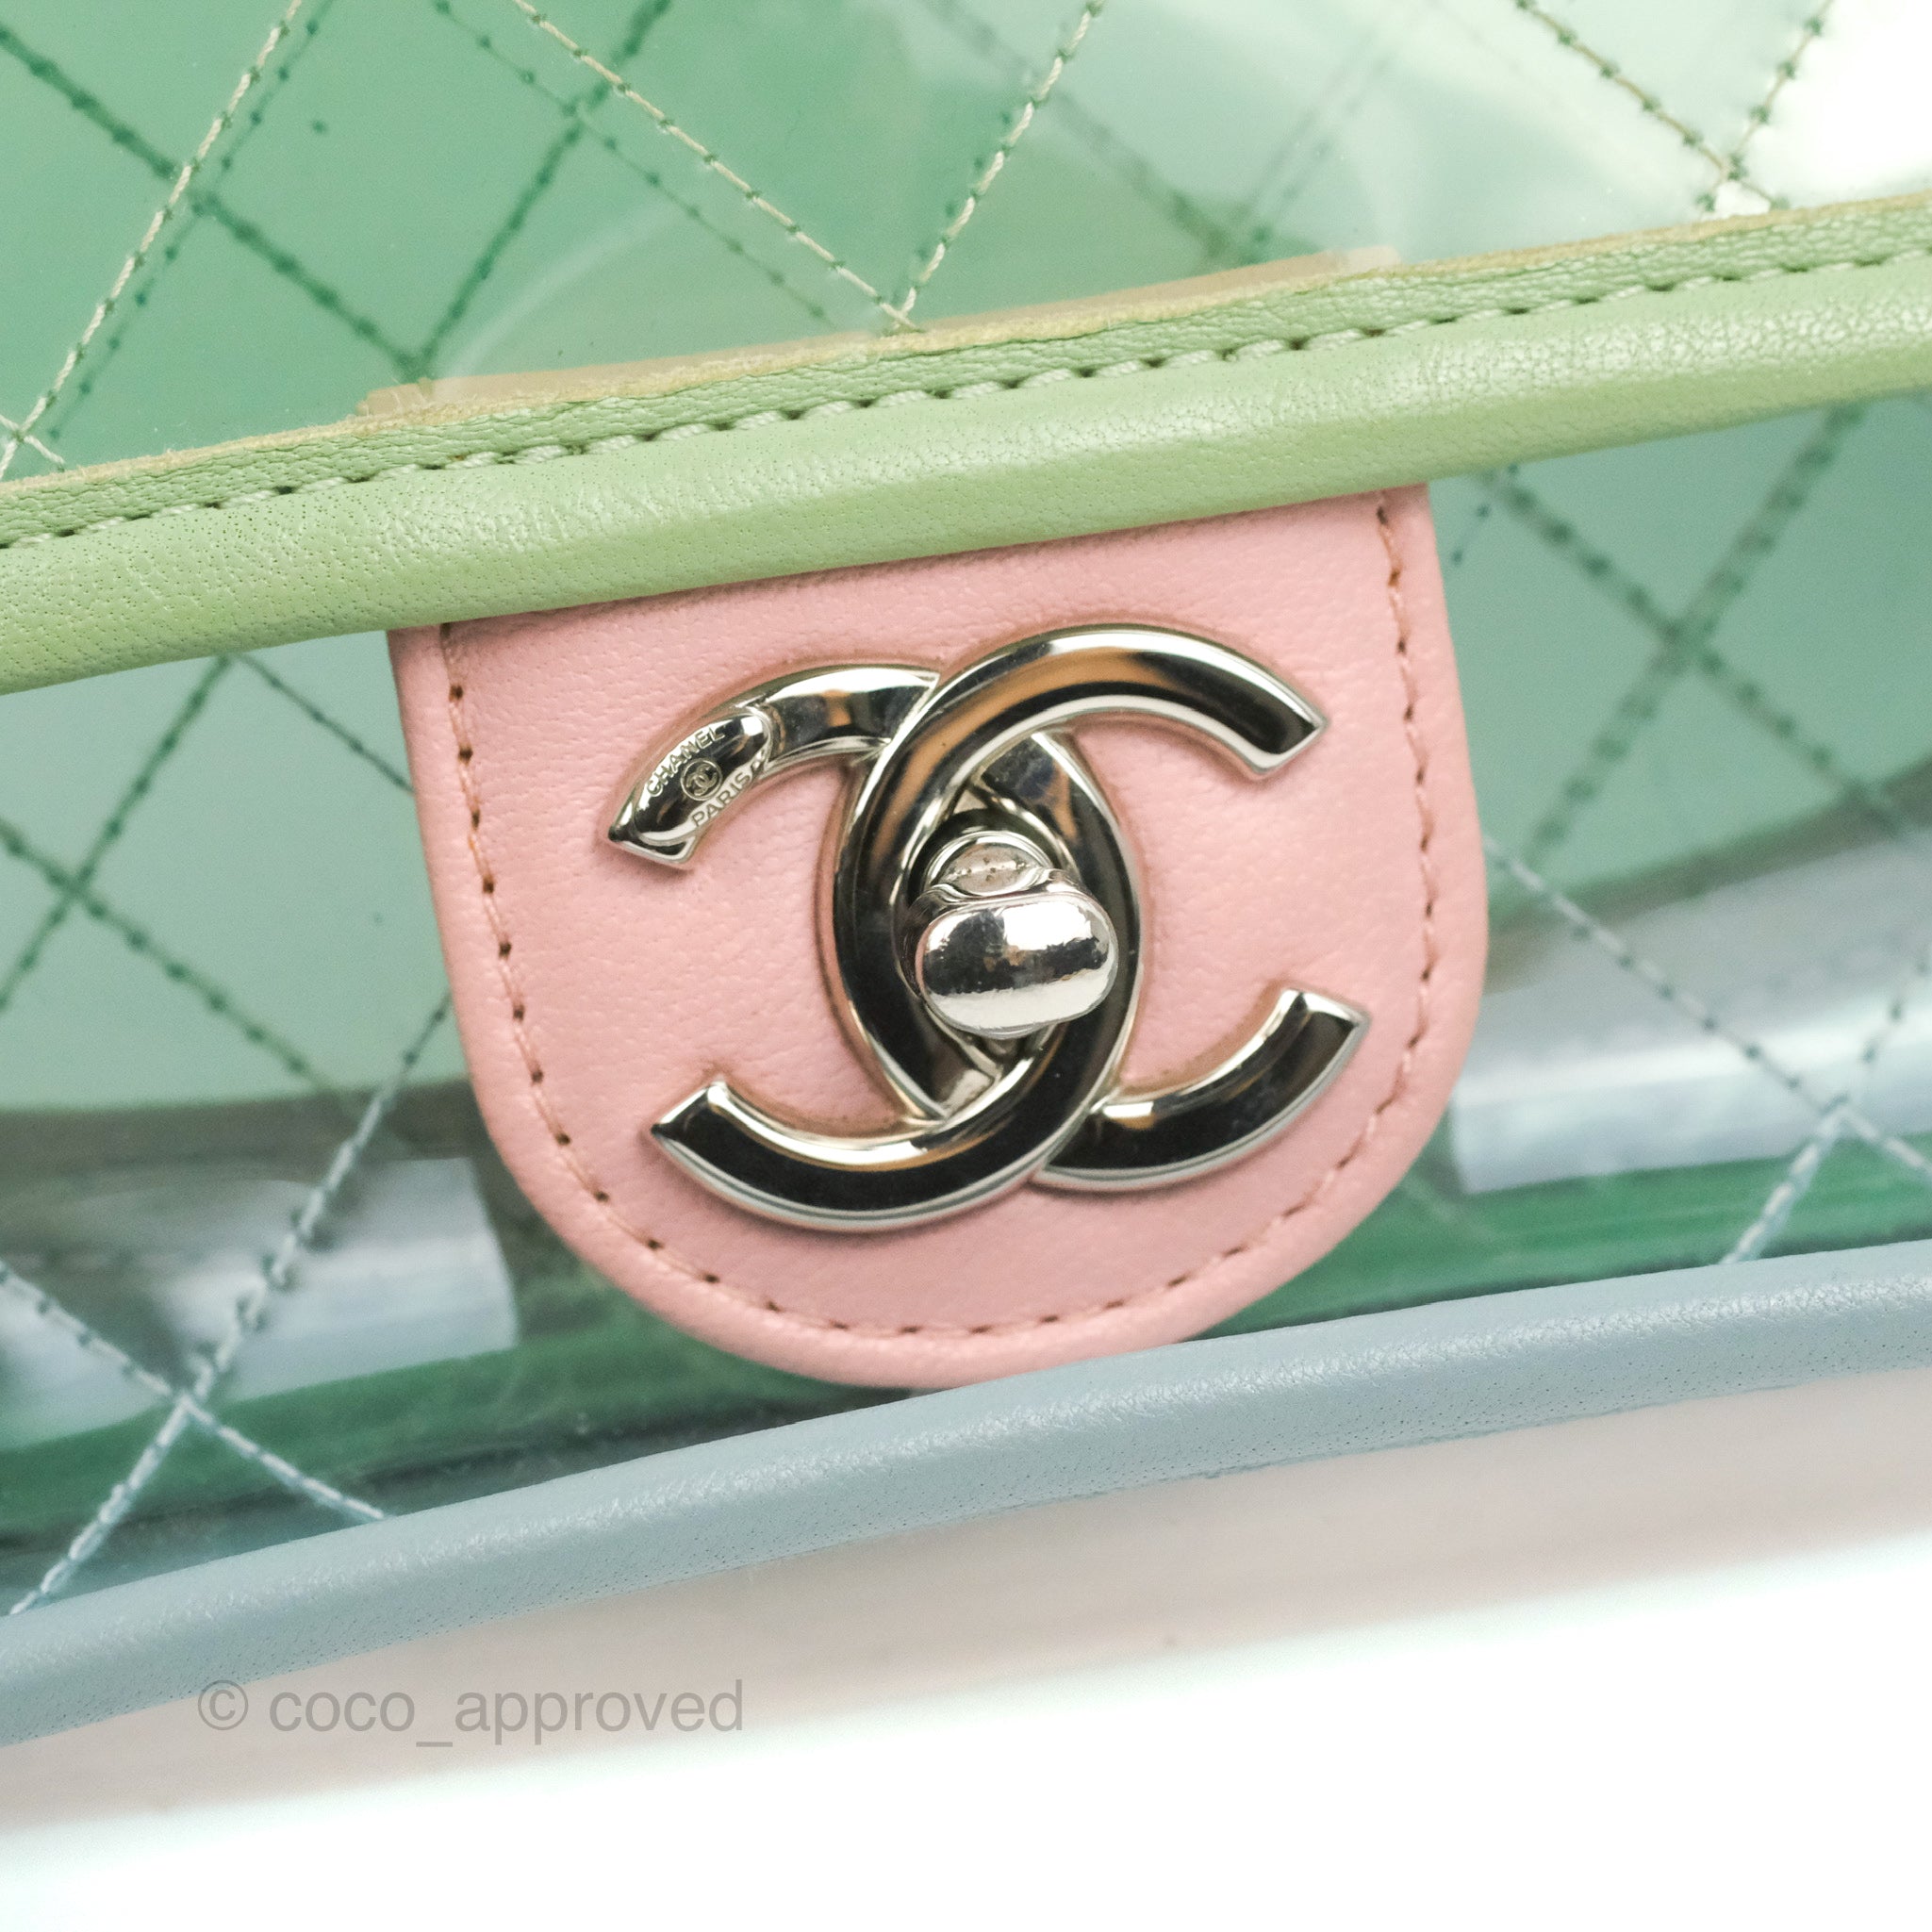 Chanel Coco Splash Lambskin PVC Quilted Shopping Tote Pink